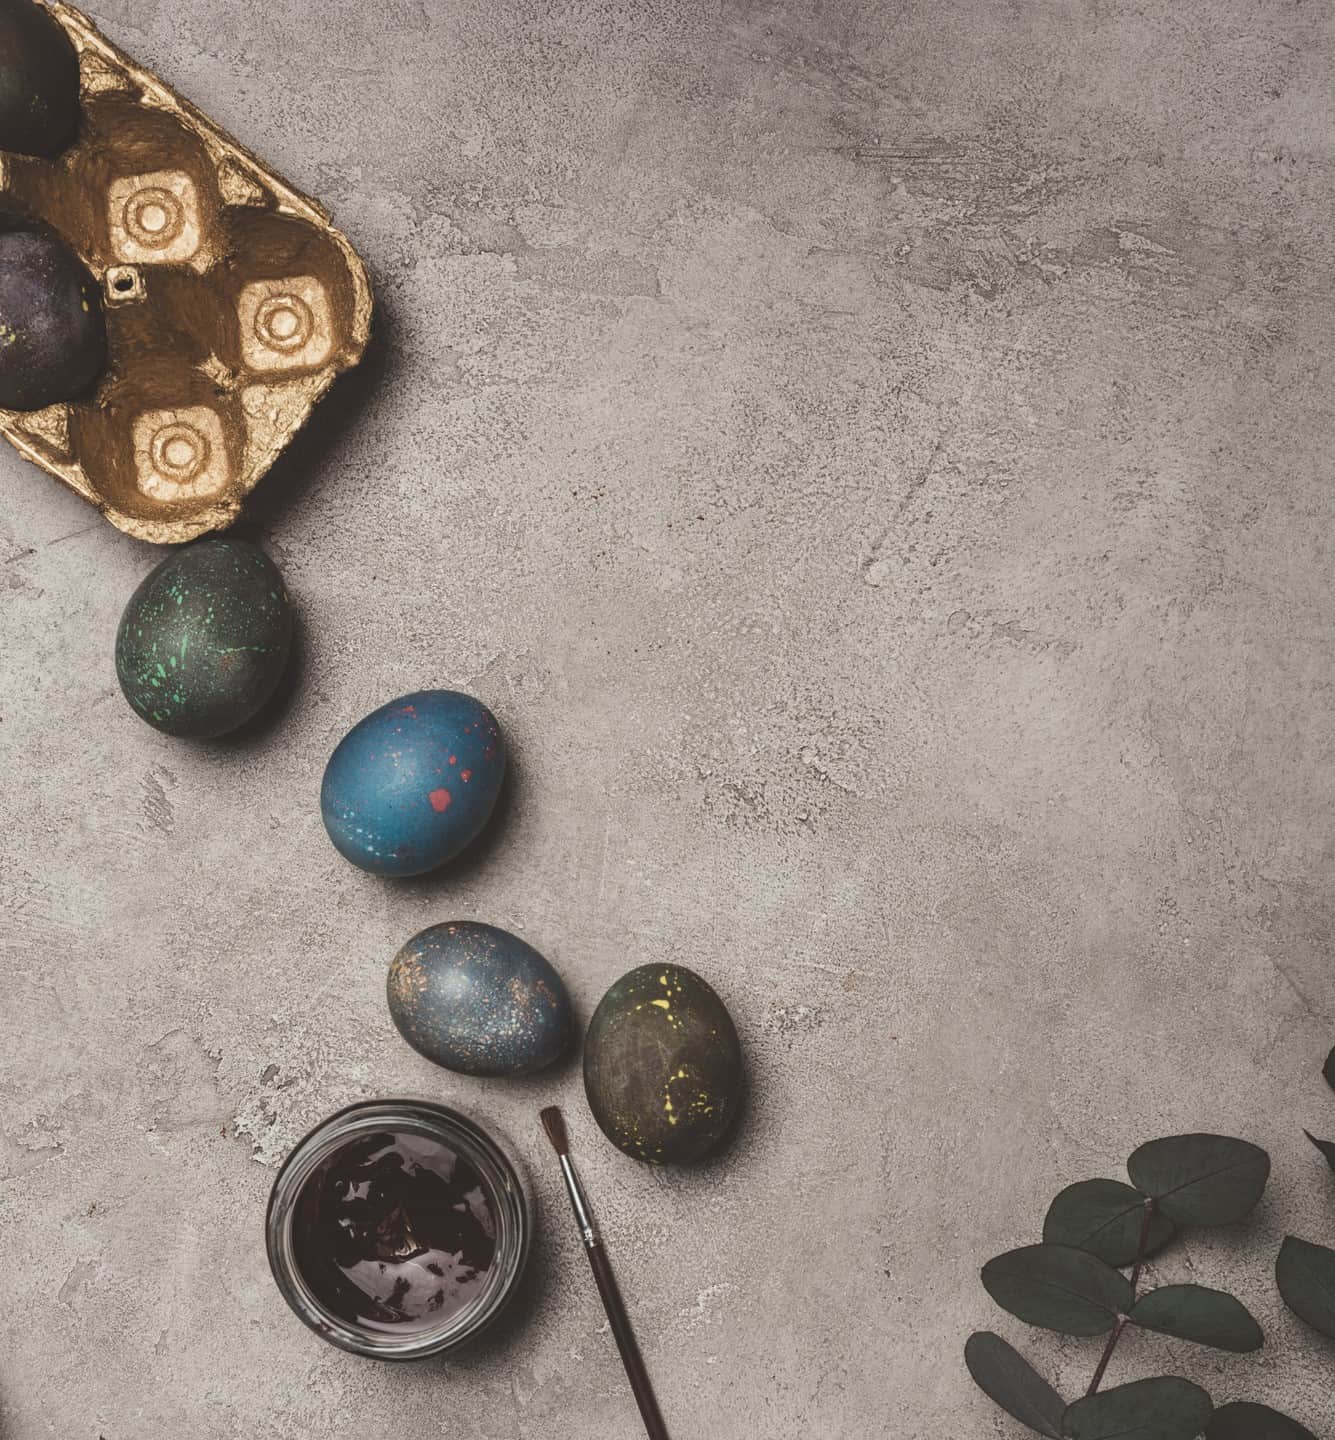 Easter egg coloring with natural colors